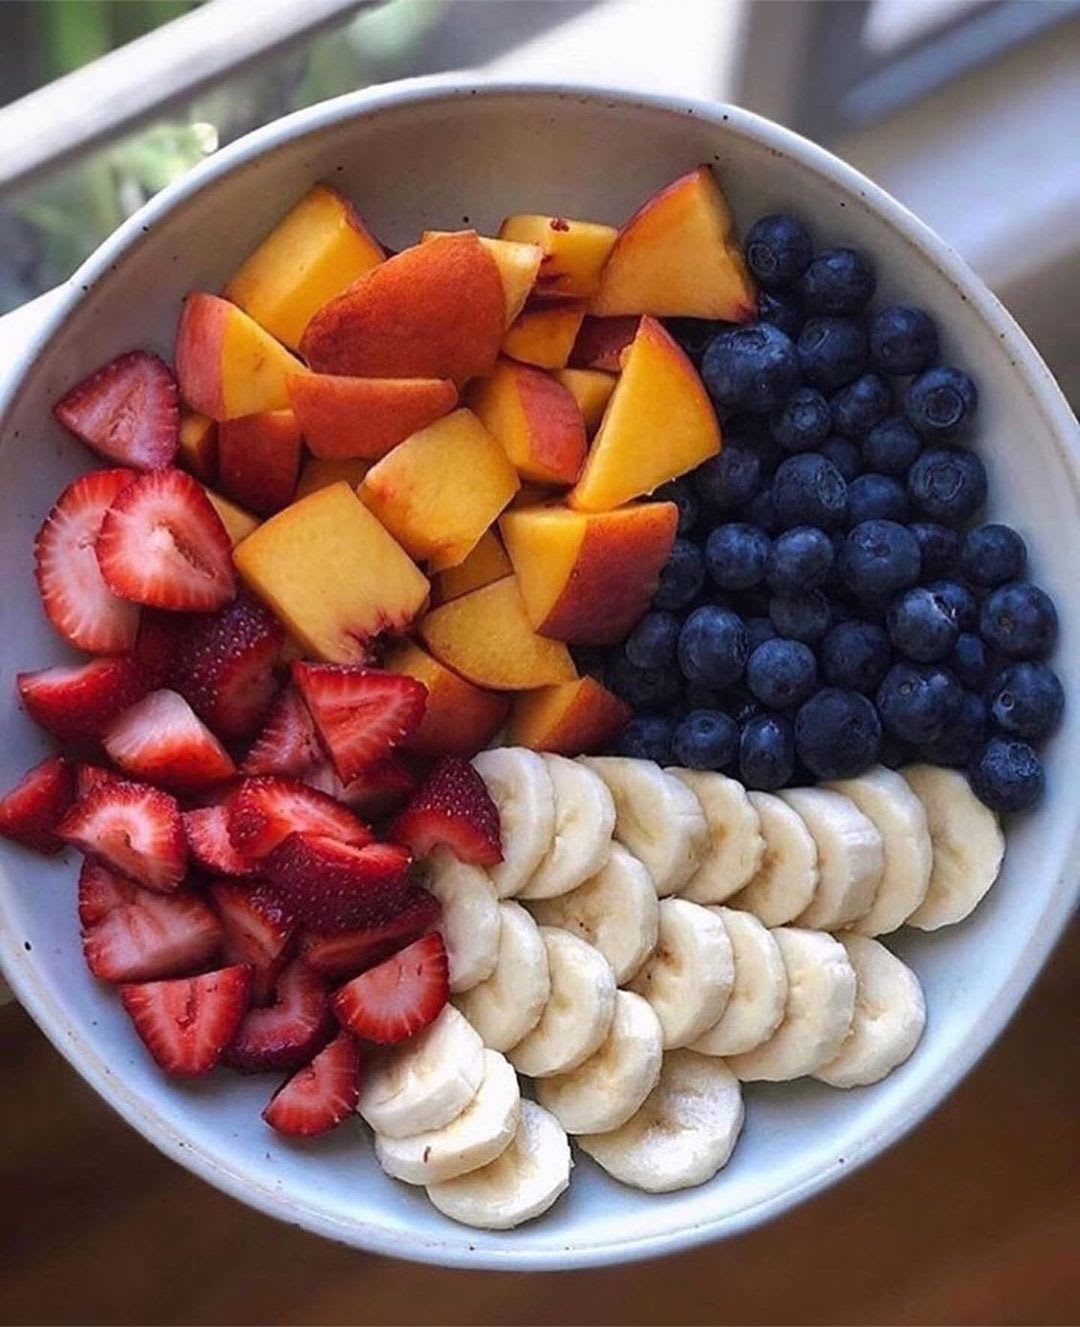 14.6k Likes, 85 Comments - Delicious Healthy Food (@delicioushealthyvideos) on Instagram: “‍ Swipe to see 5 Fr… | Healty food, Yummy food, Food cravings